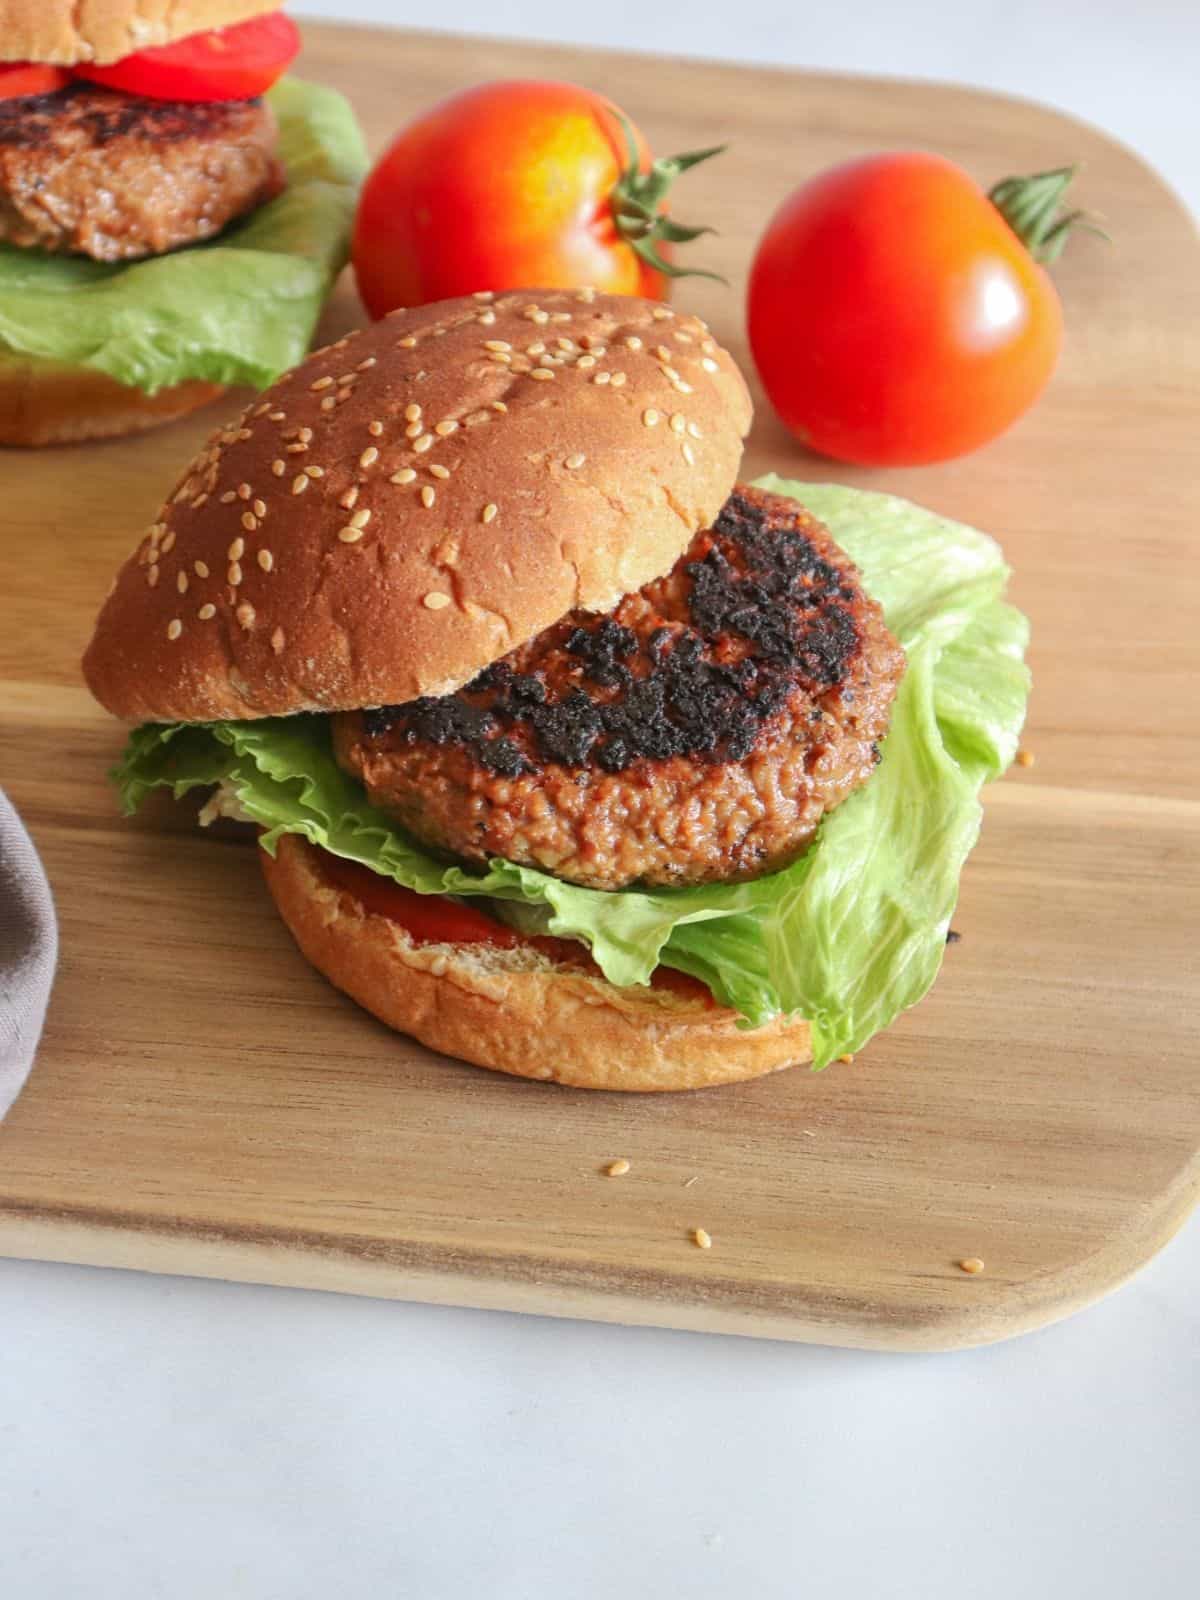 patty on bun with lettuce tomatoes on wooden surface